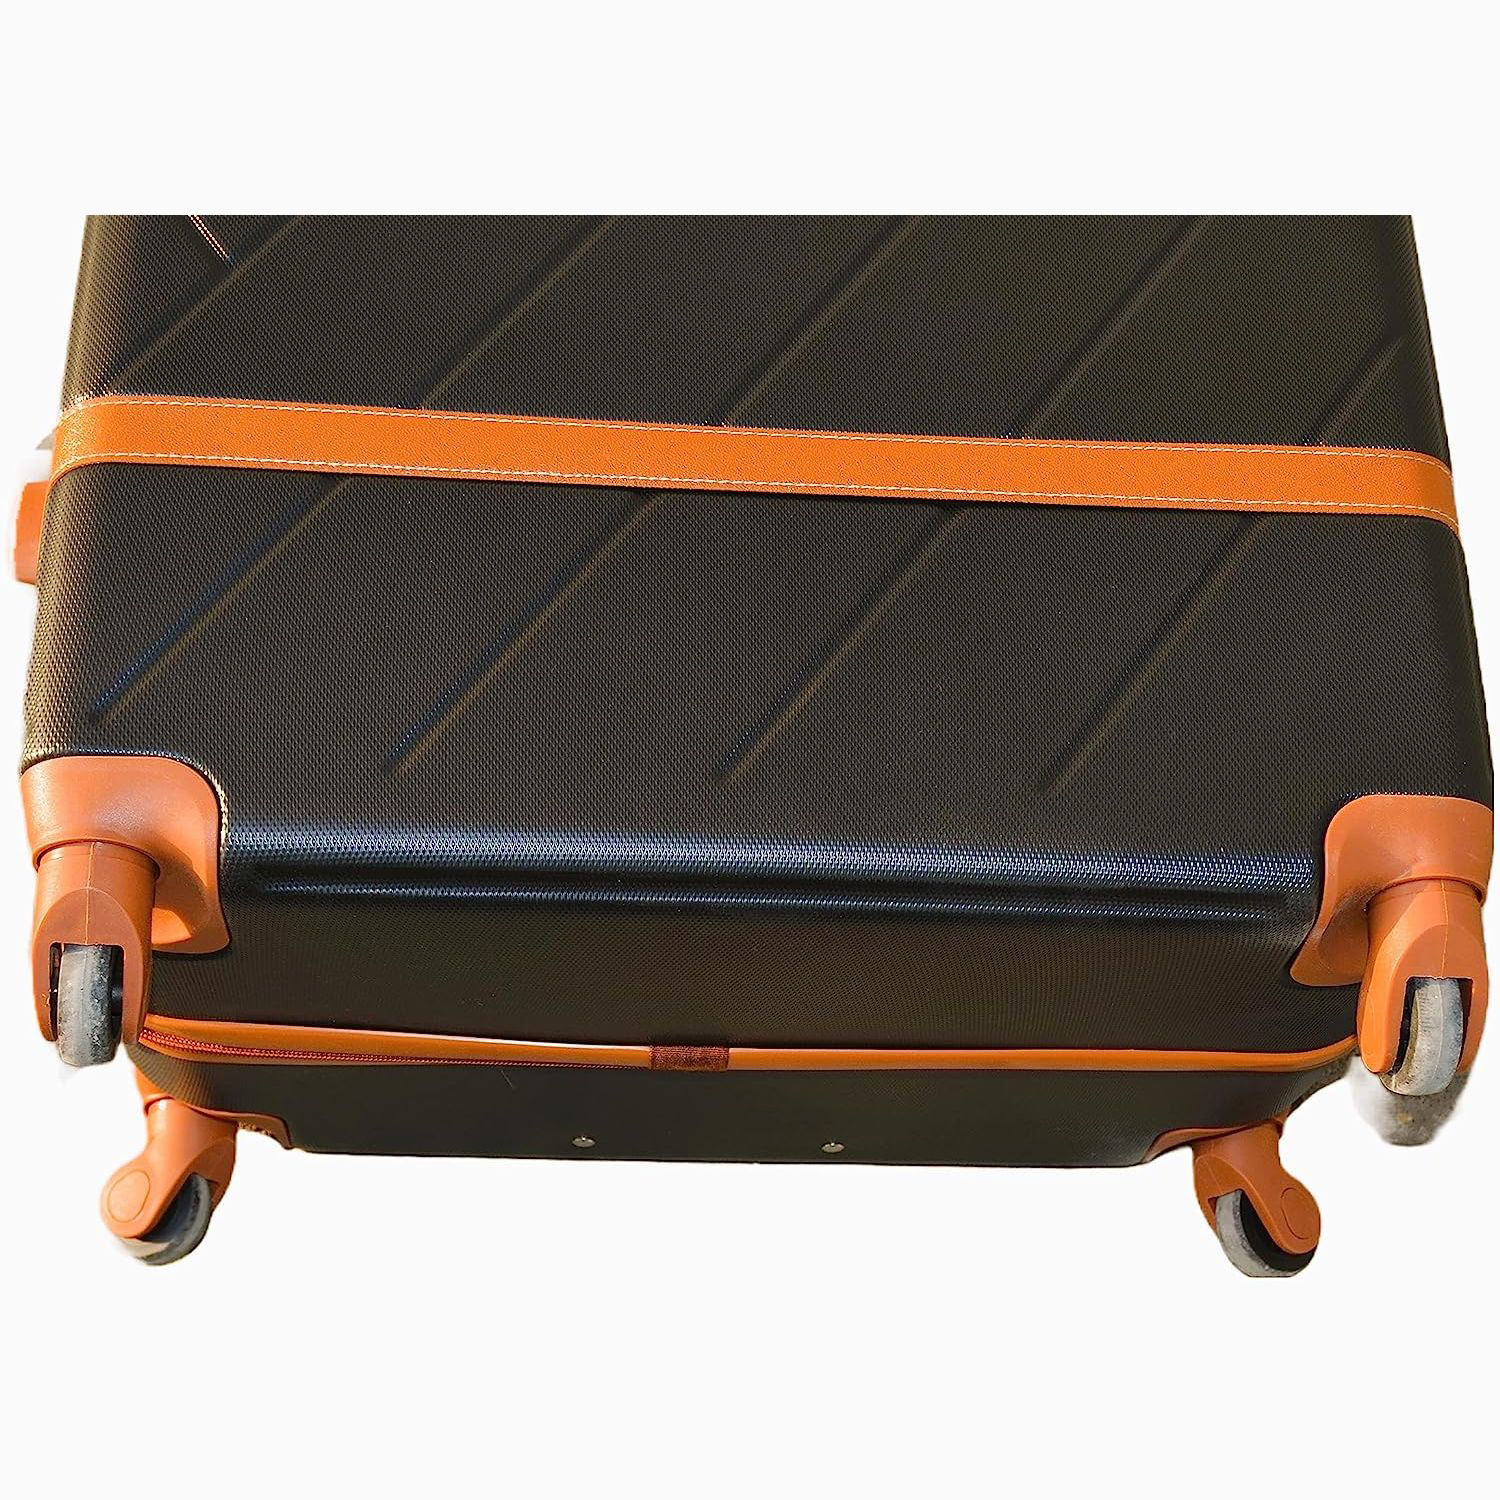 Abs Travel Luggage Trolley Set with Beauty Case (5 Pcs) in Dubai, UAE